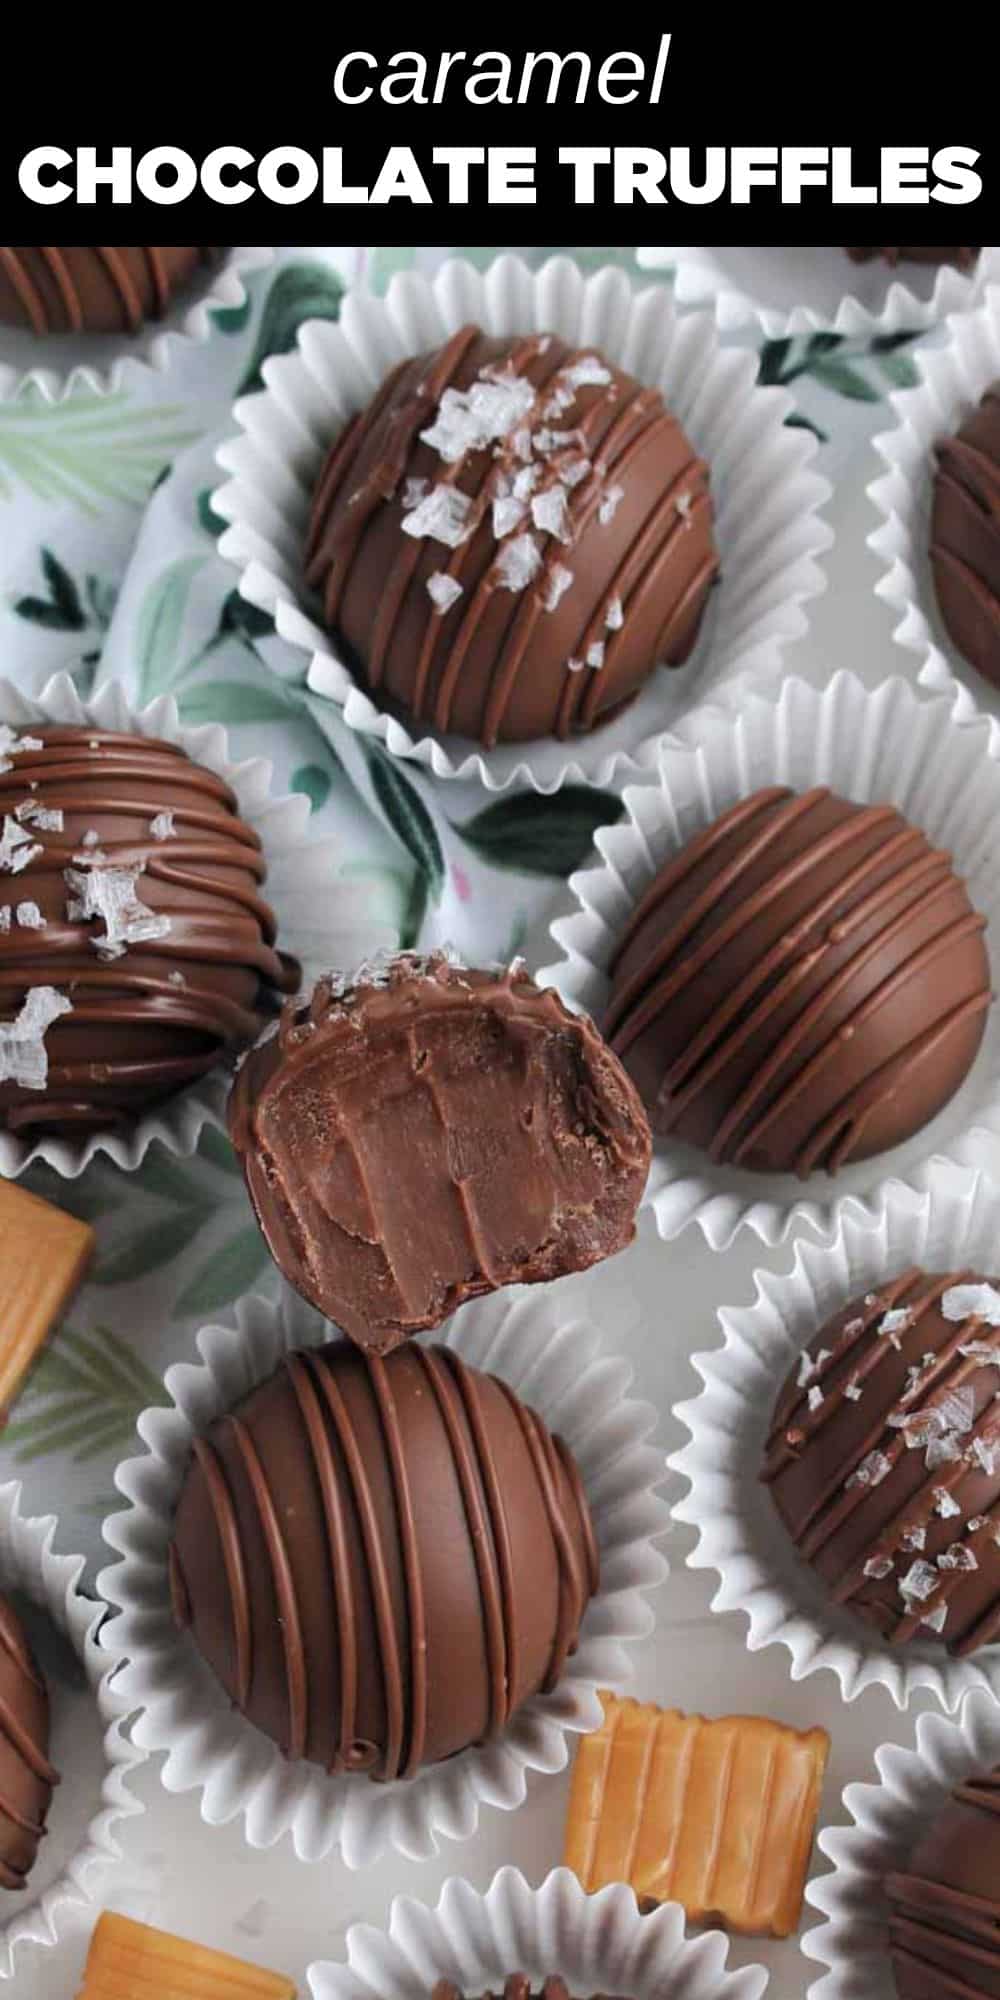 These rich and decadent Chocolate Caramel Truffles have a luscious creamy center surrounded by a sweet chocolate shell with a delicate sprinkling of flakey sea salt. They're the perfect homemade, bite-sized treat for any occasion. 